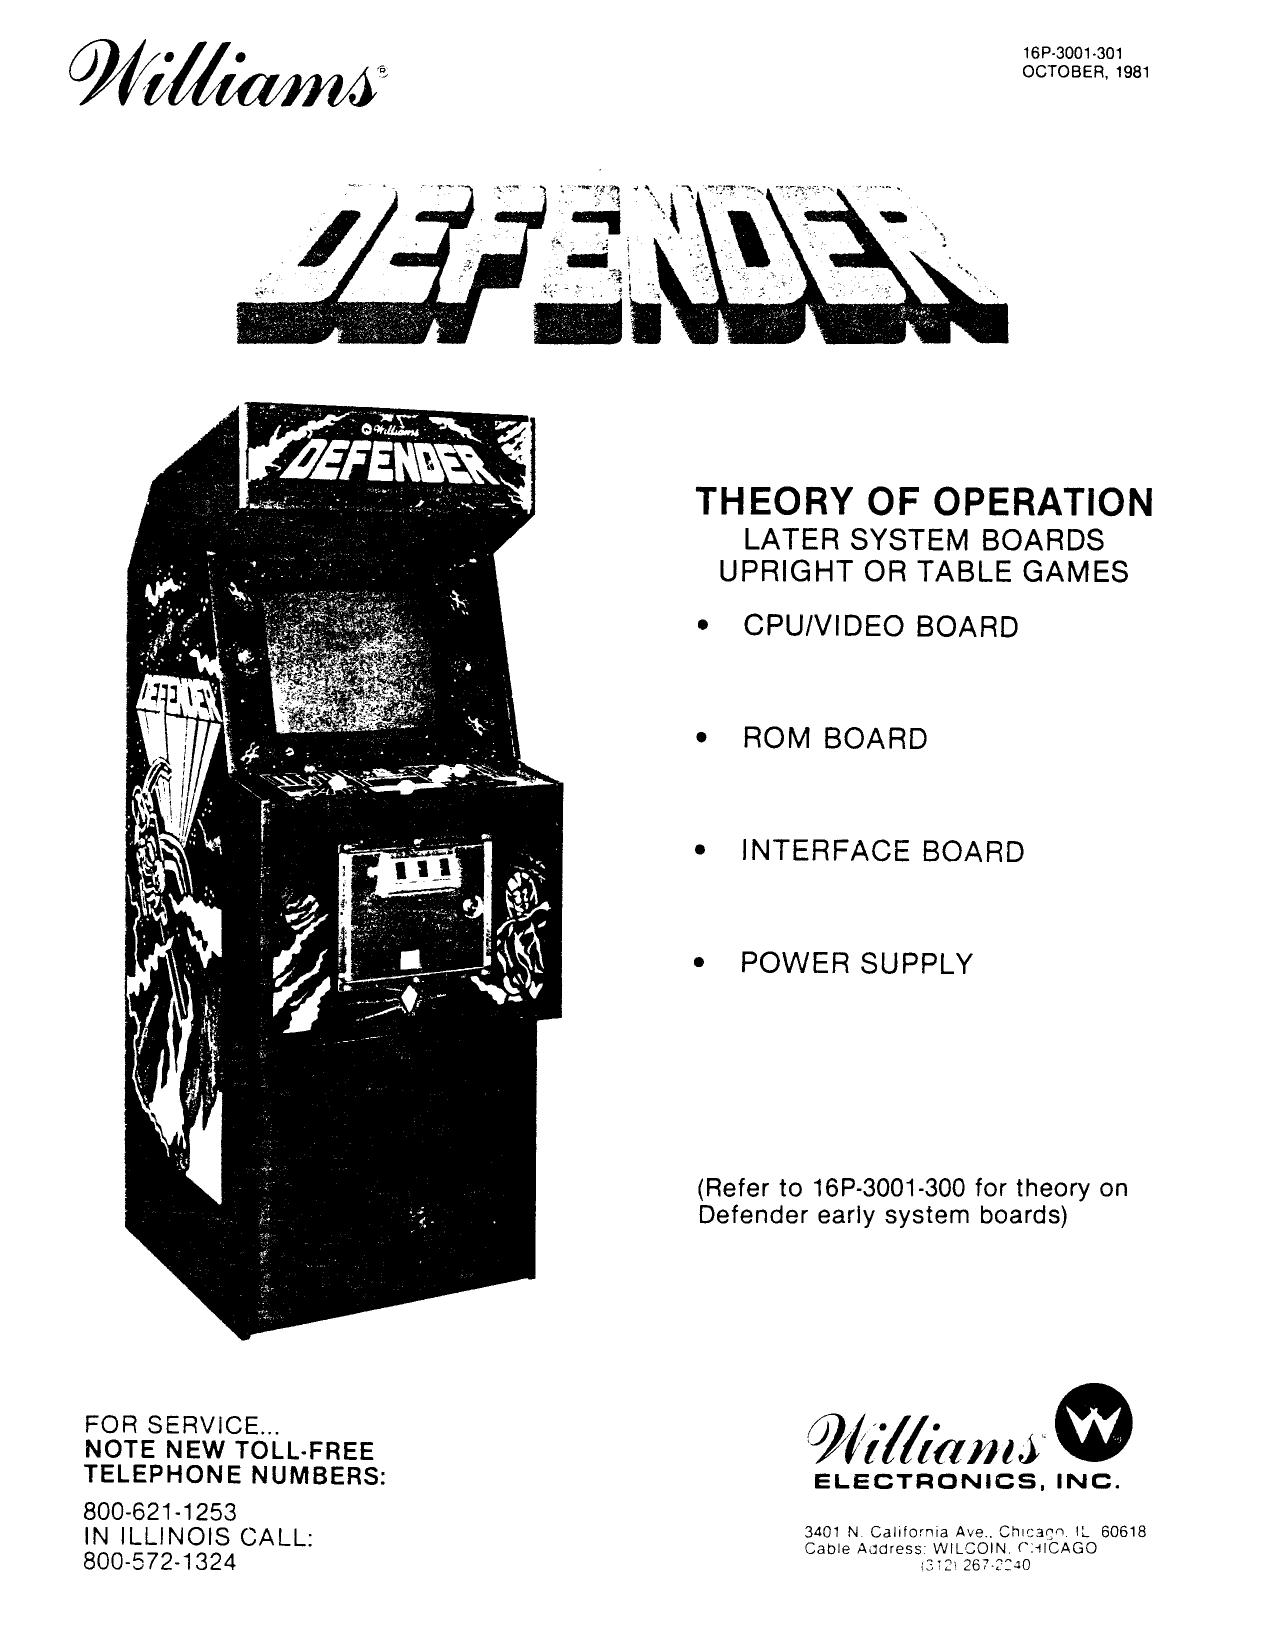 Defender (Theory of Operation